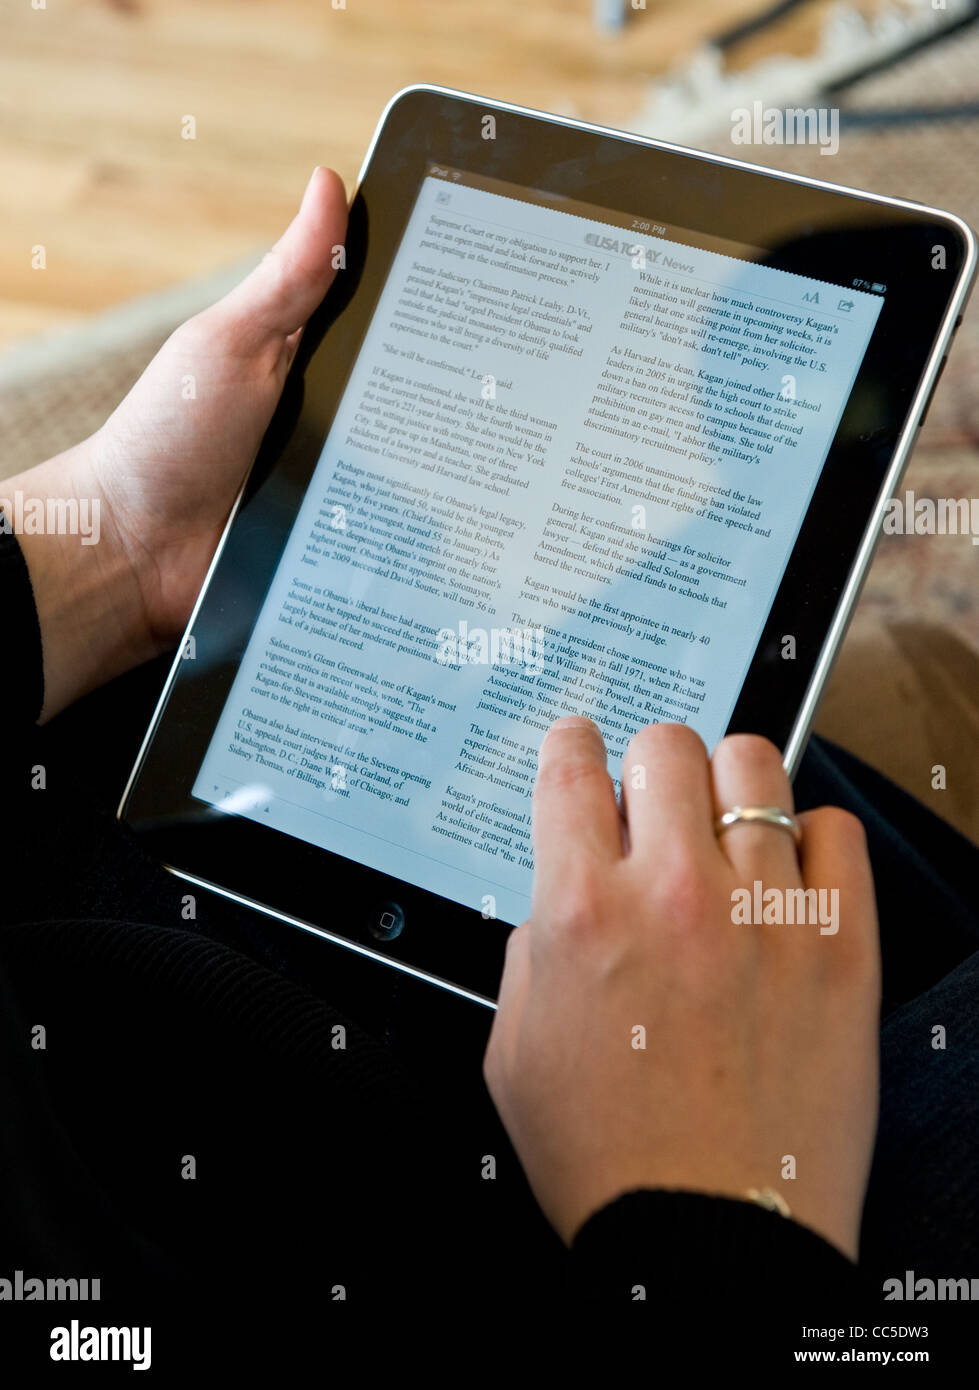 Caucasian woman uses Apple iPad to read USA Today news article Stock Photo